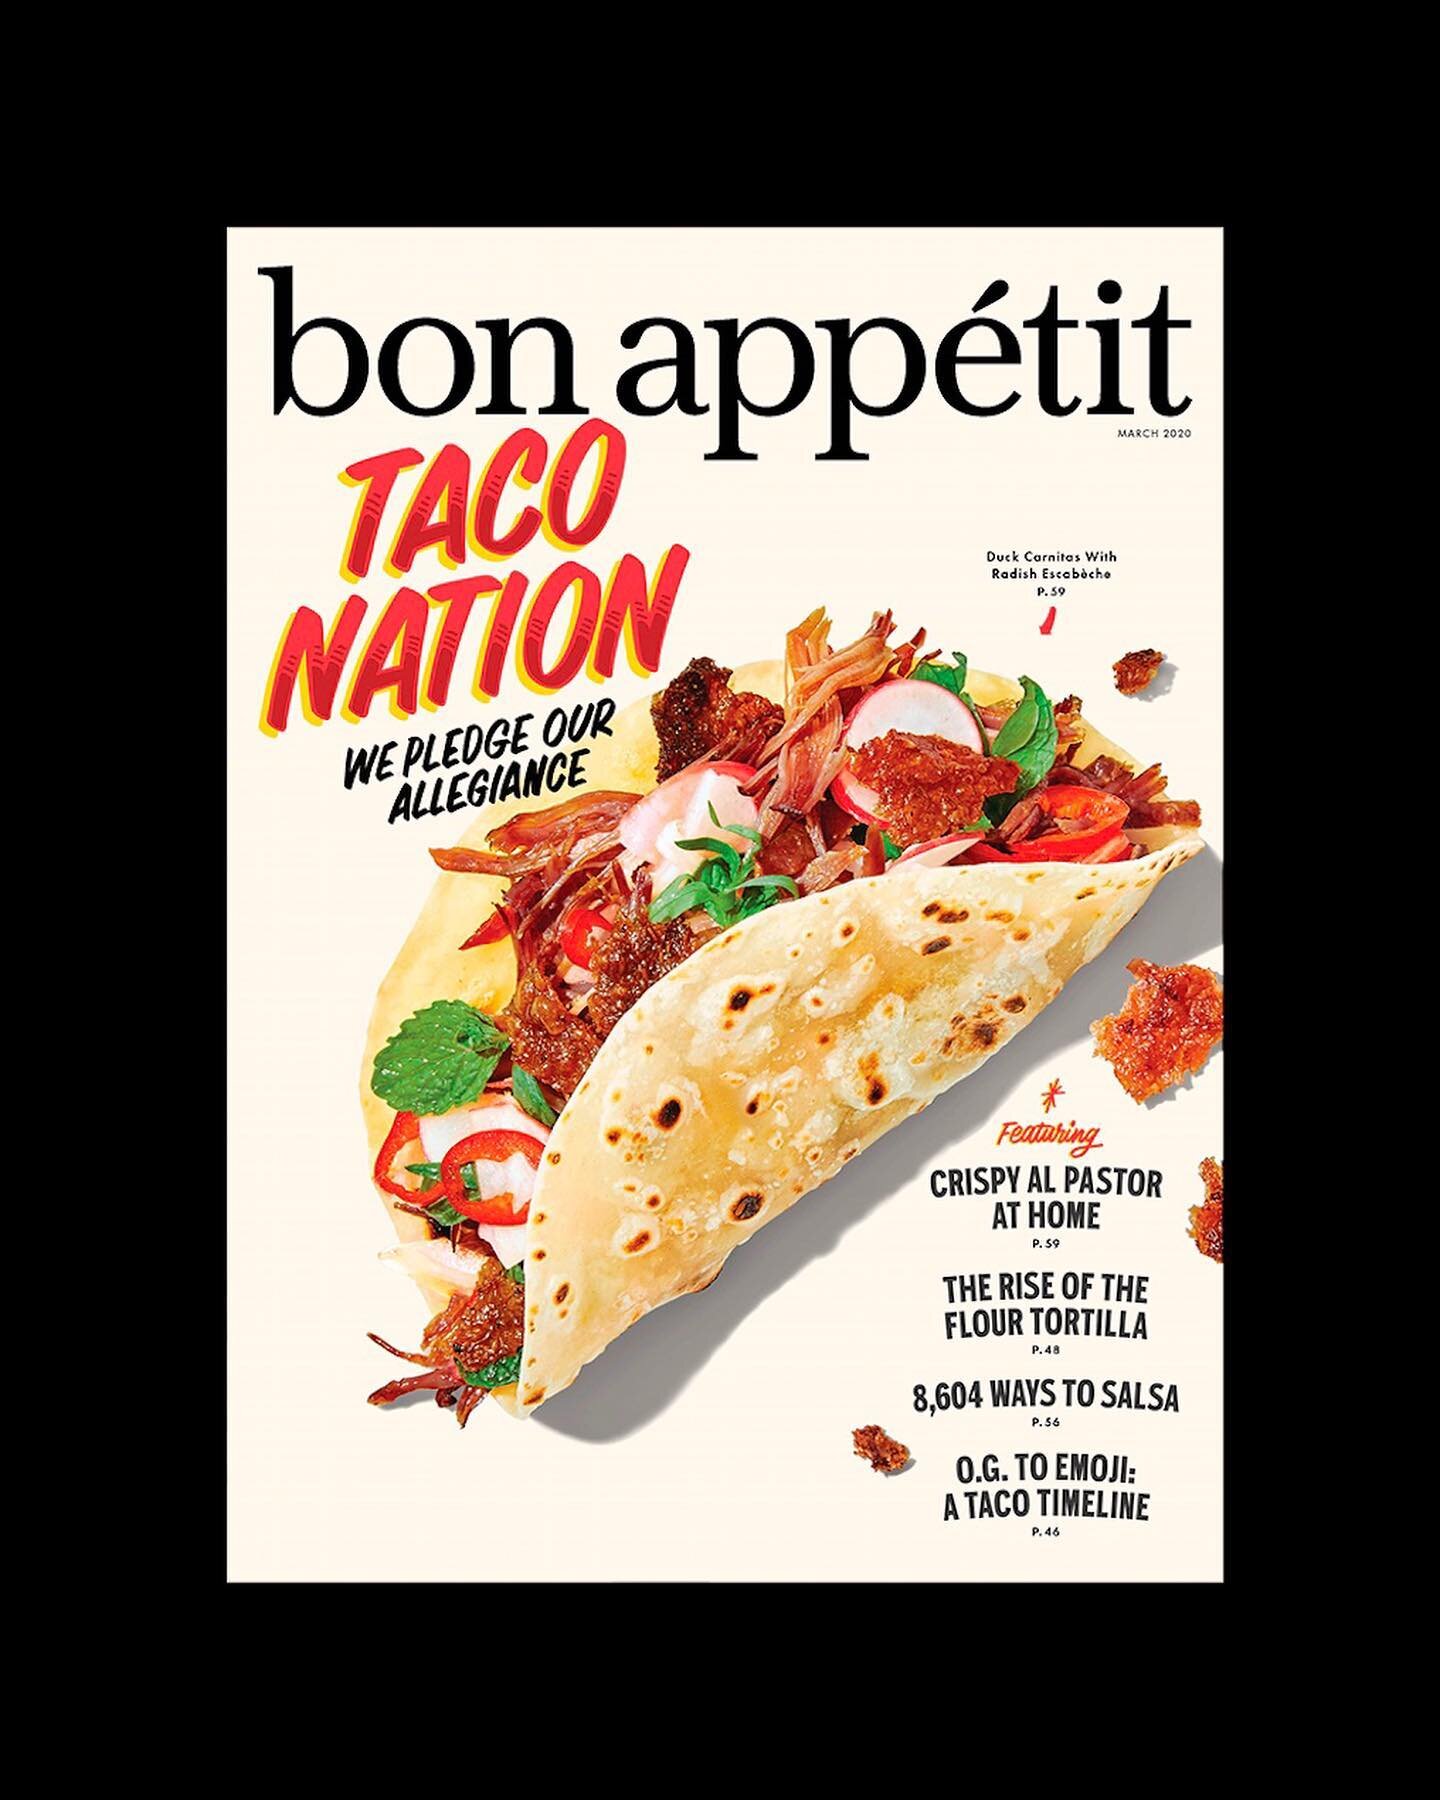 Still processing the amazing opportunity I was presented at the beginning of the year&mdash;a local photo assignment for @bonappetitmag! So honored to help showcase the diverse tacos found across the USA by photographing San Diego&rsquo;s iconic Baja